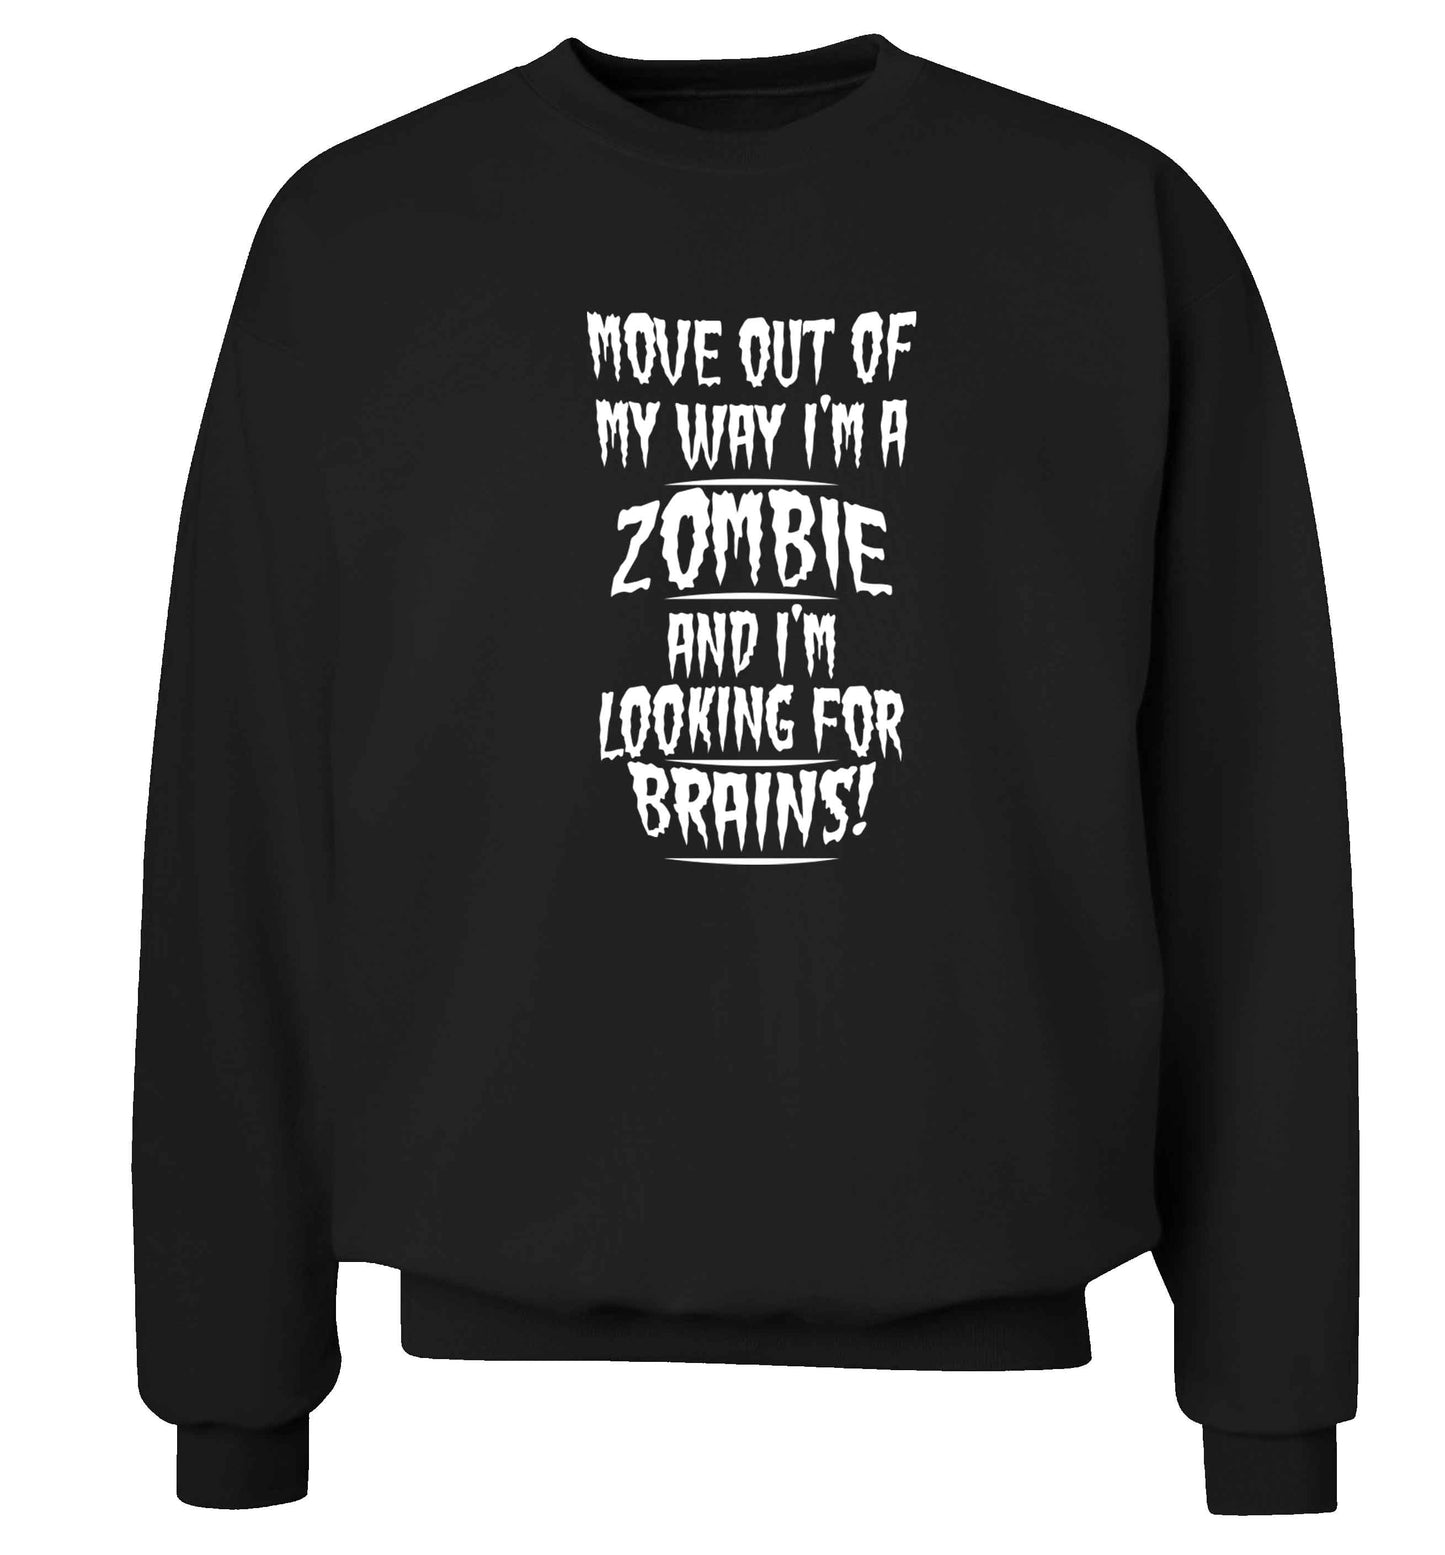 I'm a zombie and I'm looking for brains! Adult's unisex black Sweater 2XL